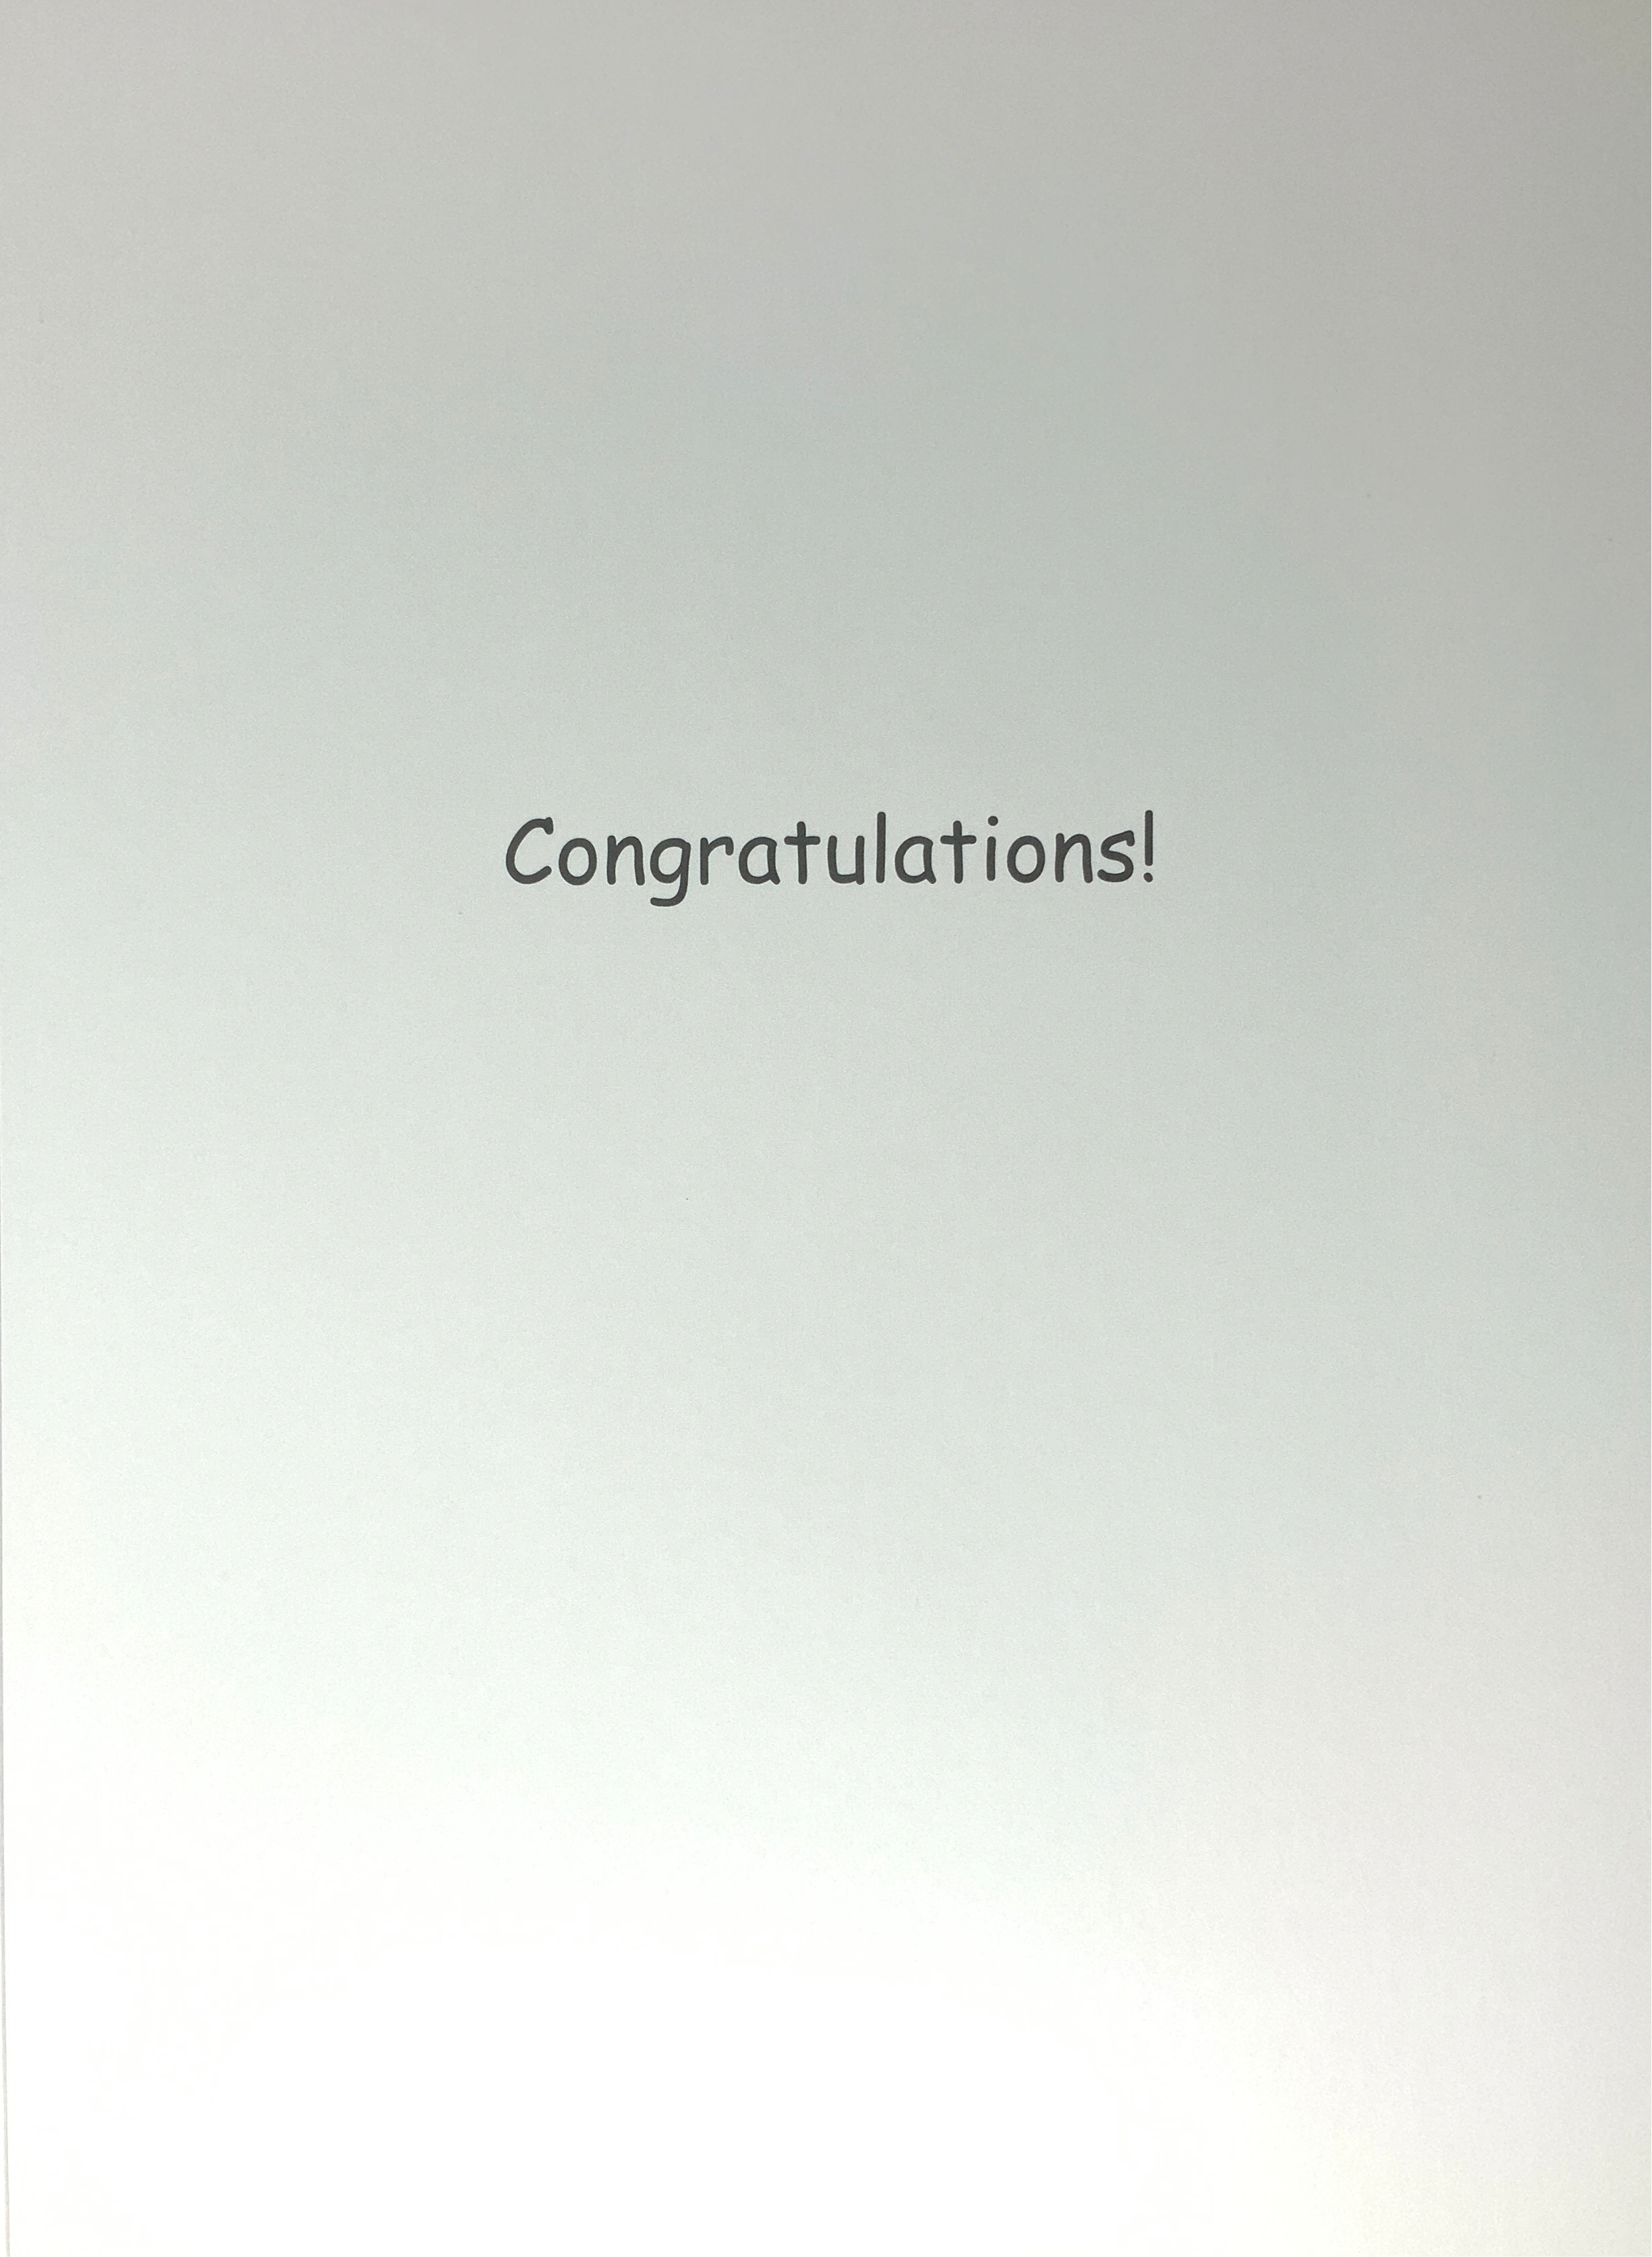 Congratulations Card - A Clever Sausage ( Large )